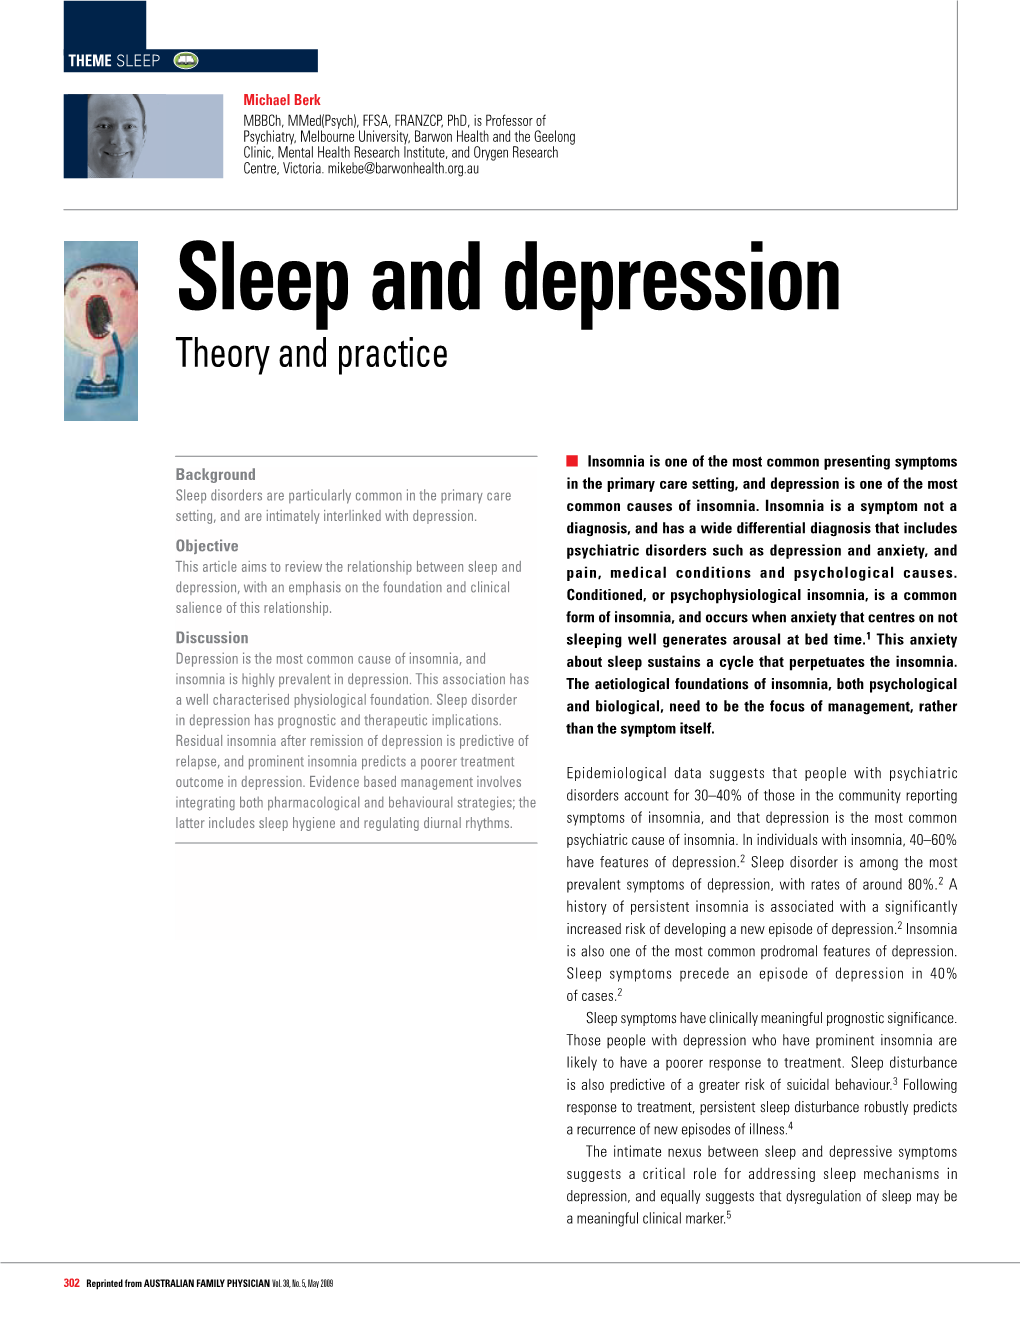 Sleep and Depression Theory and Practice